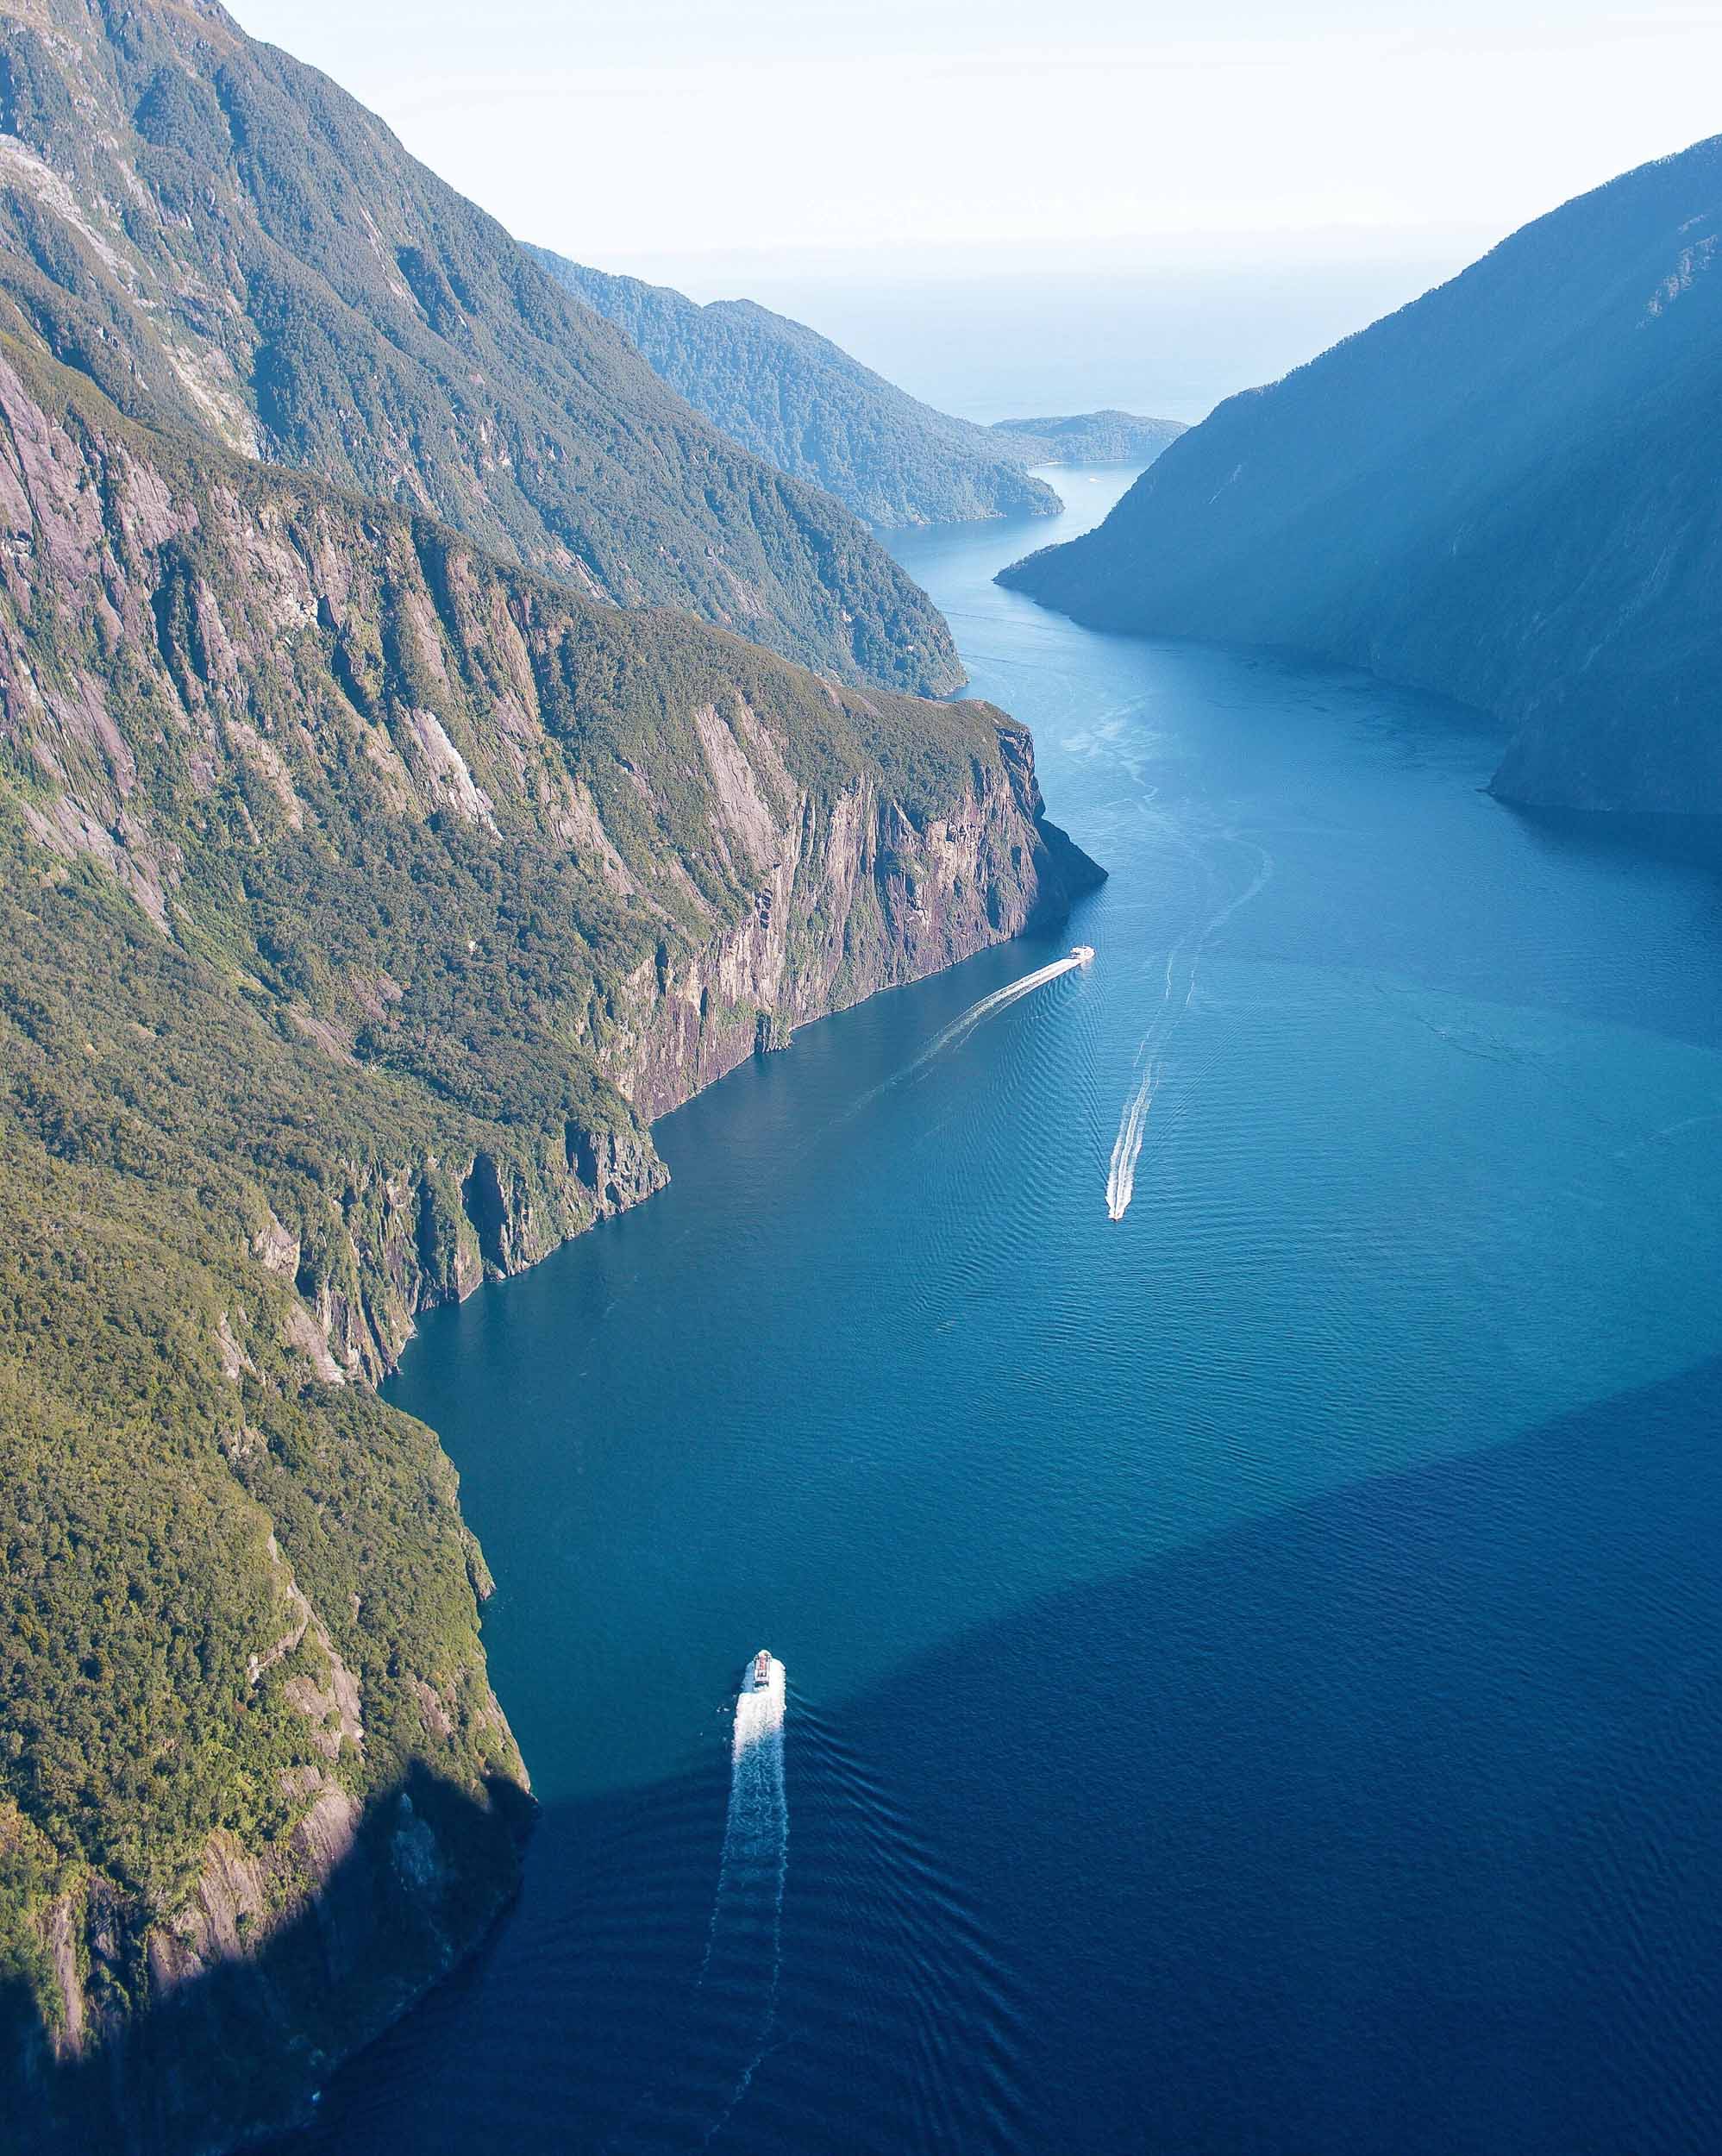 Milford Sound views from a helicopter in New Zealand